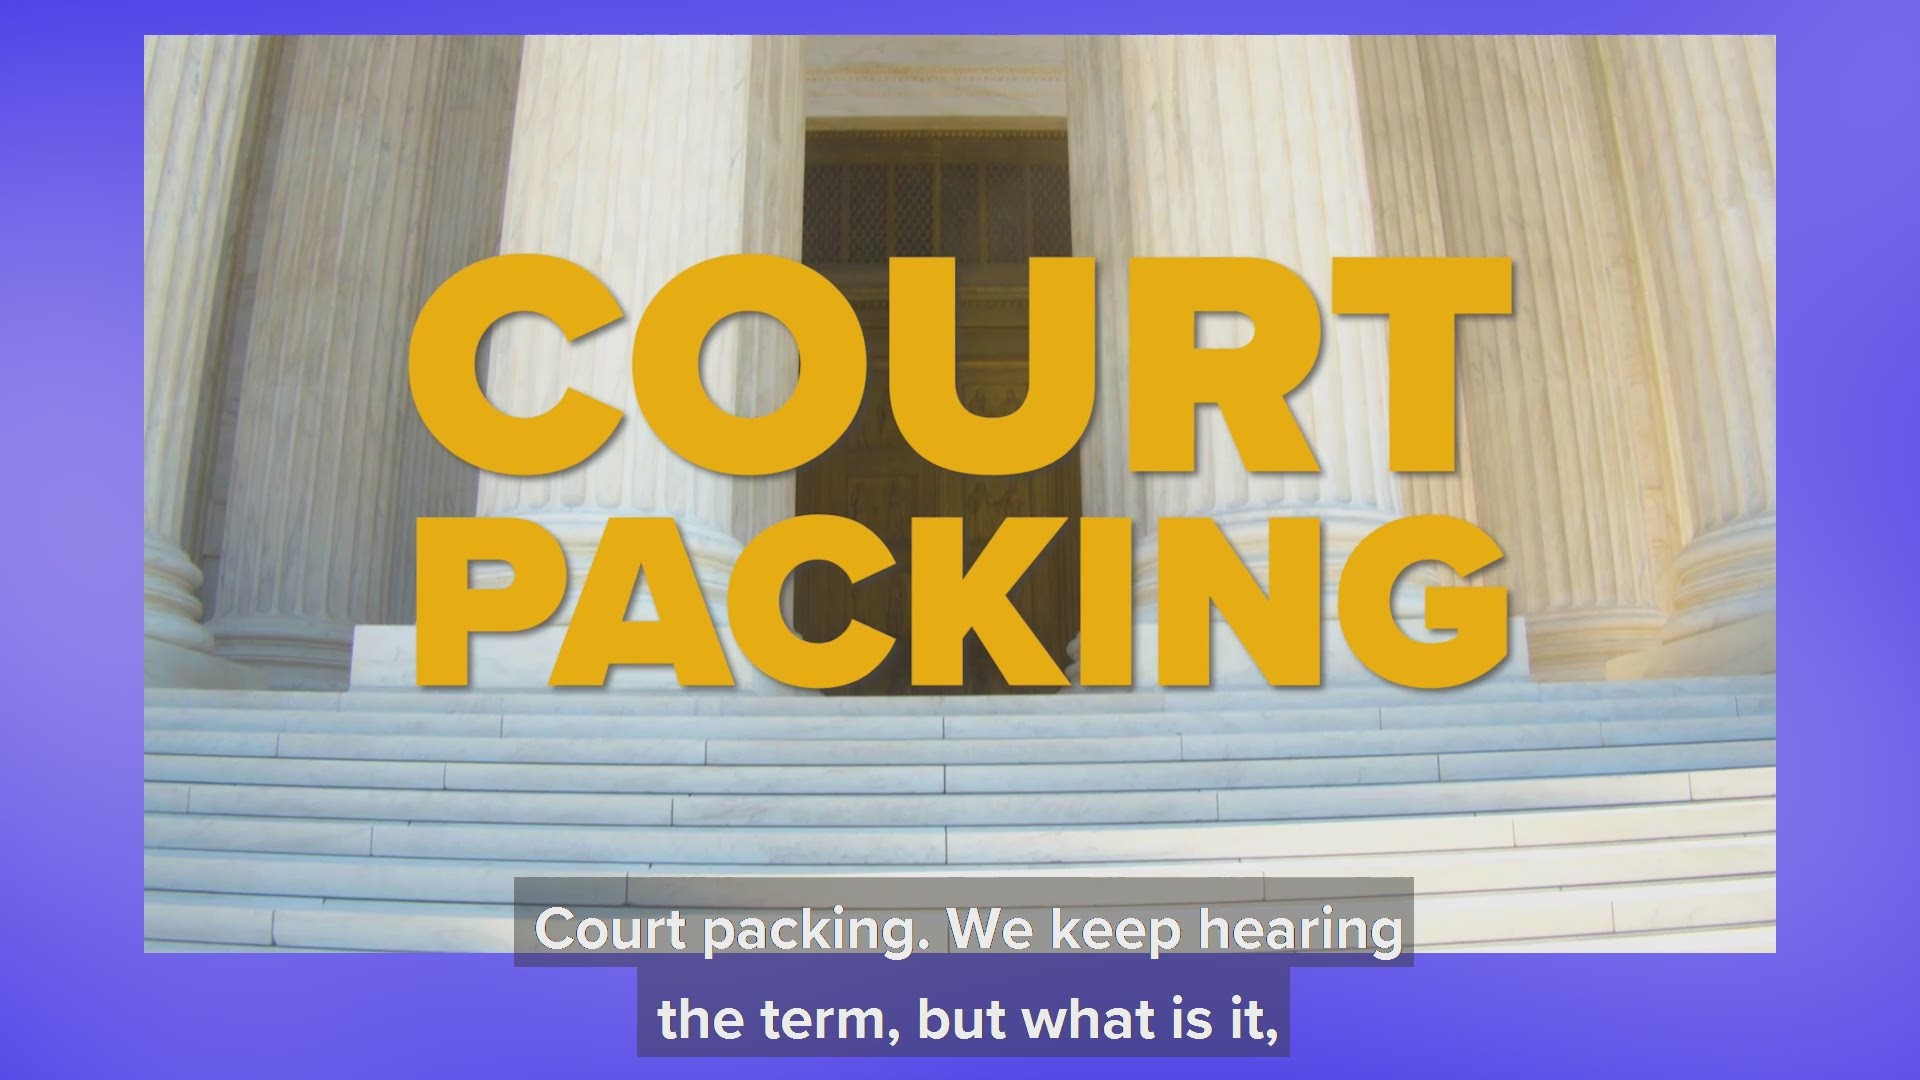 Here's what you need to know about the history behind court packing.